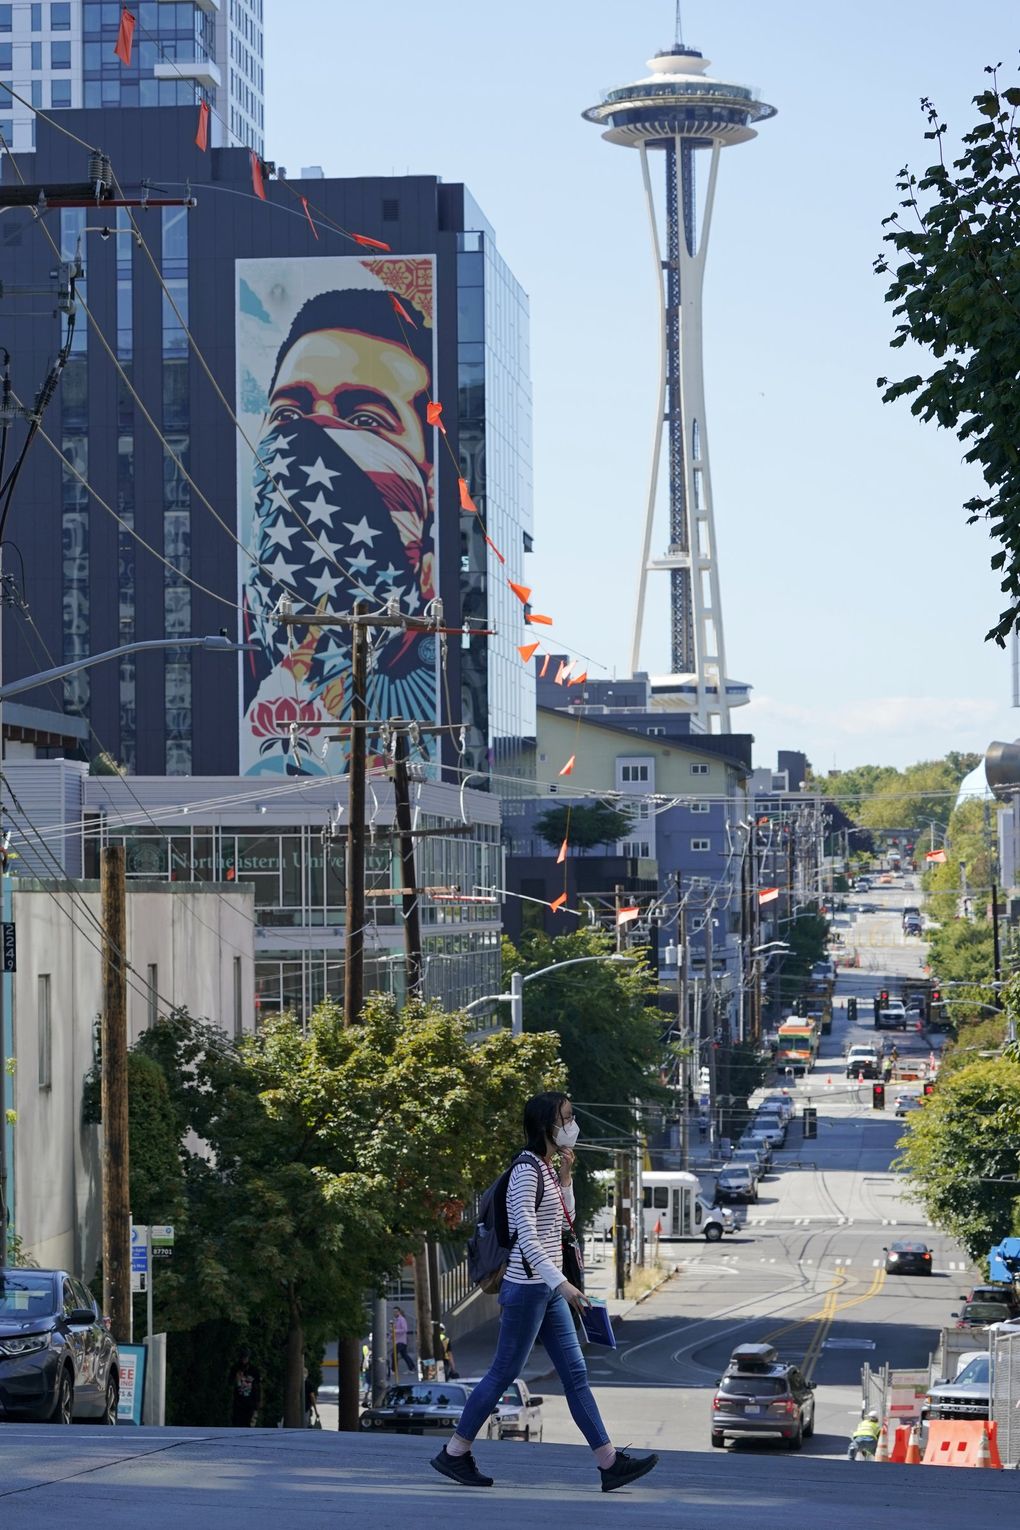 A pedestrian wears a mask while crossing a street near the Space Needle in Seattle.